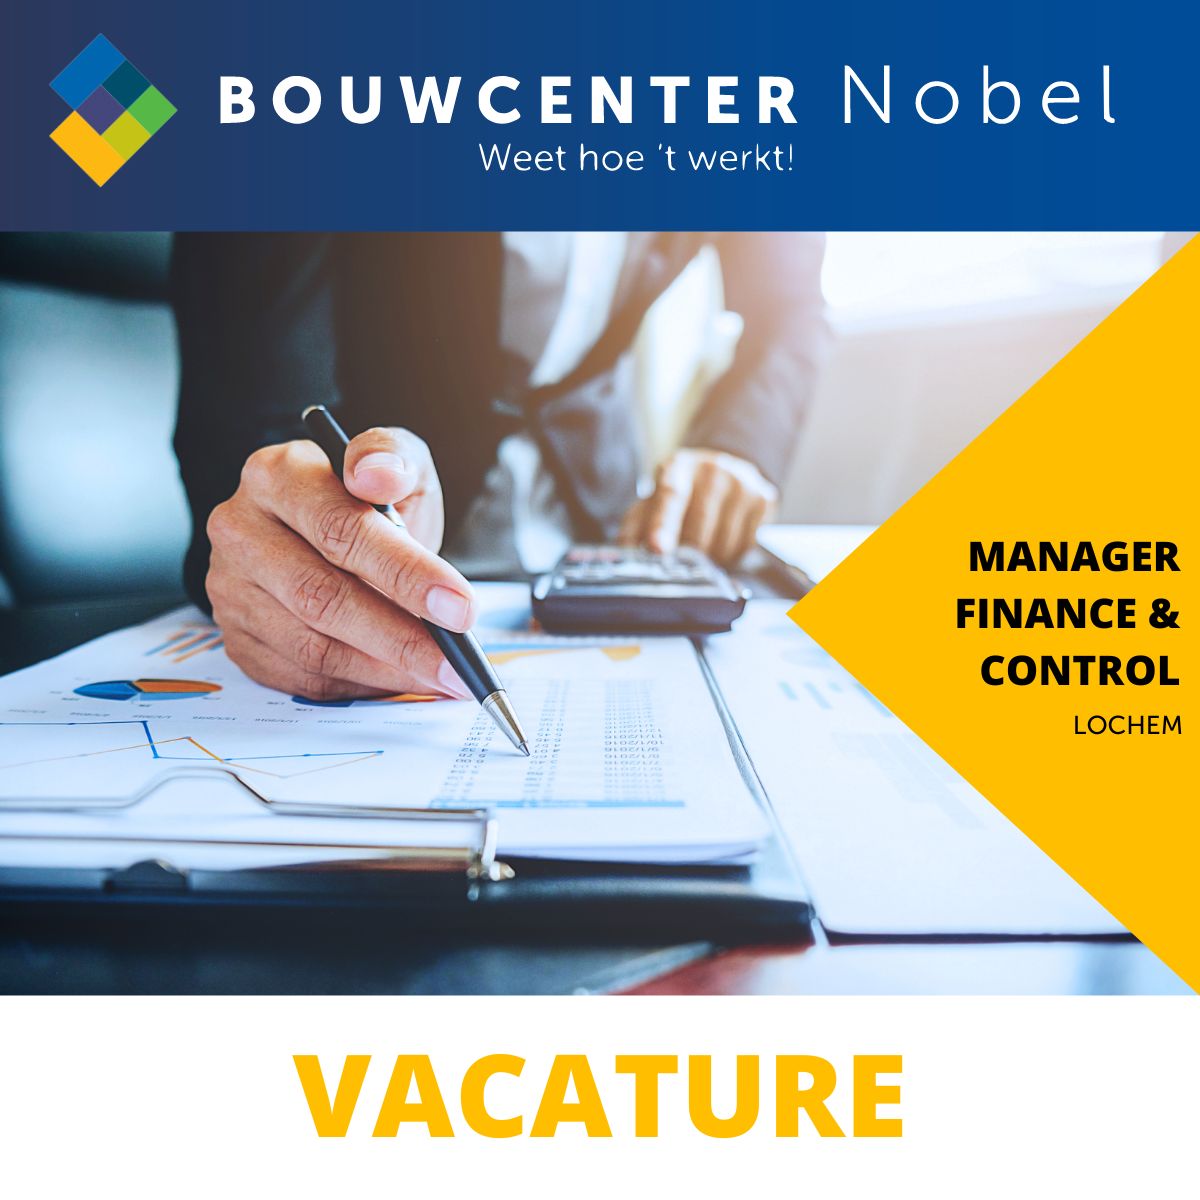 Visual Vacature Manager Finance & Control.jpg